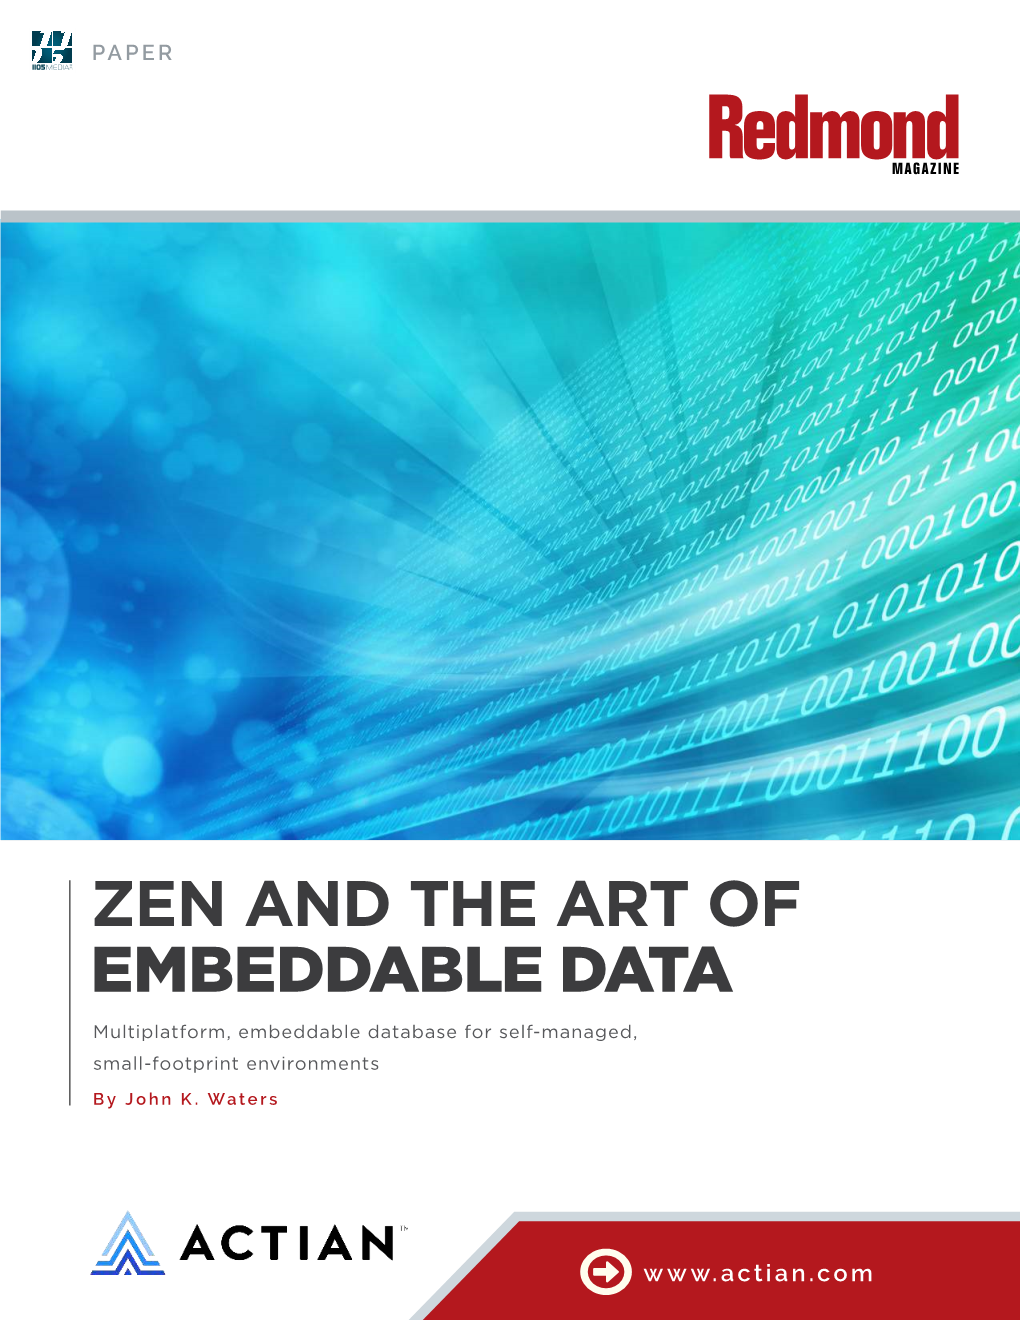 Zen and the Art of Embeddable Data